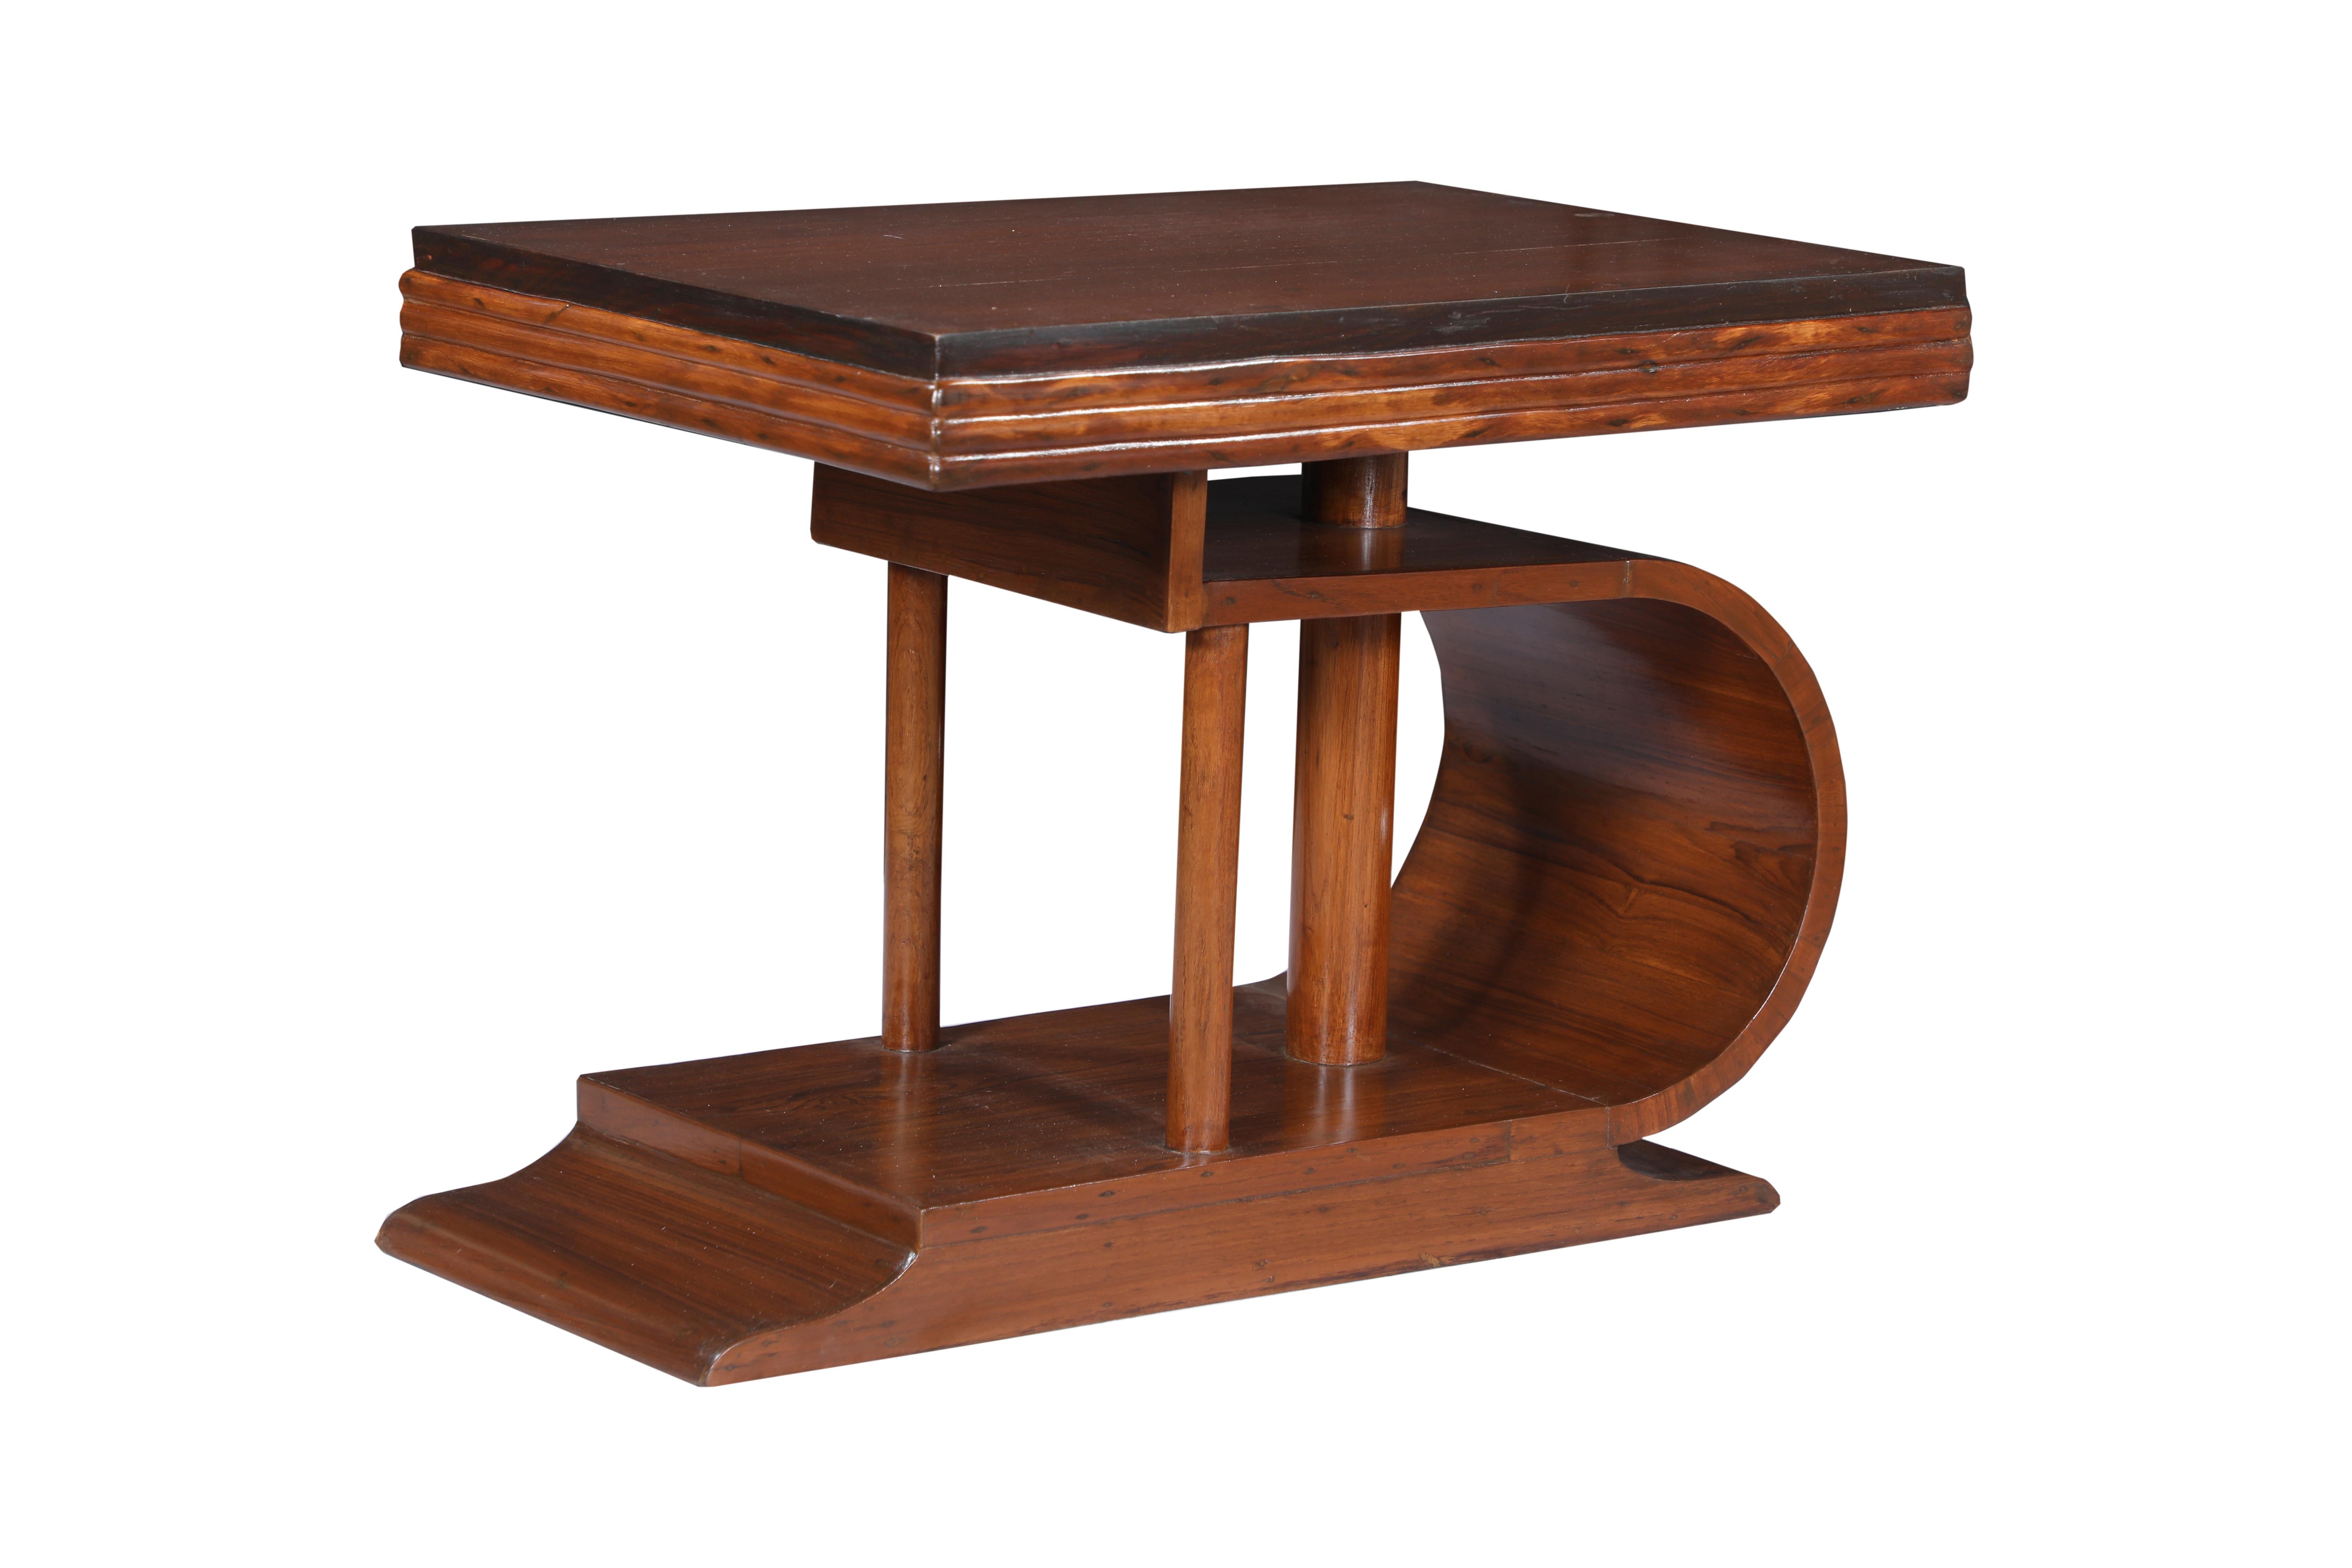 A Mid-Century Modern teak coffee or cocktail table. An unusual base design with reeded edges along the top. Dates to the 1970's and has been refinished.